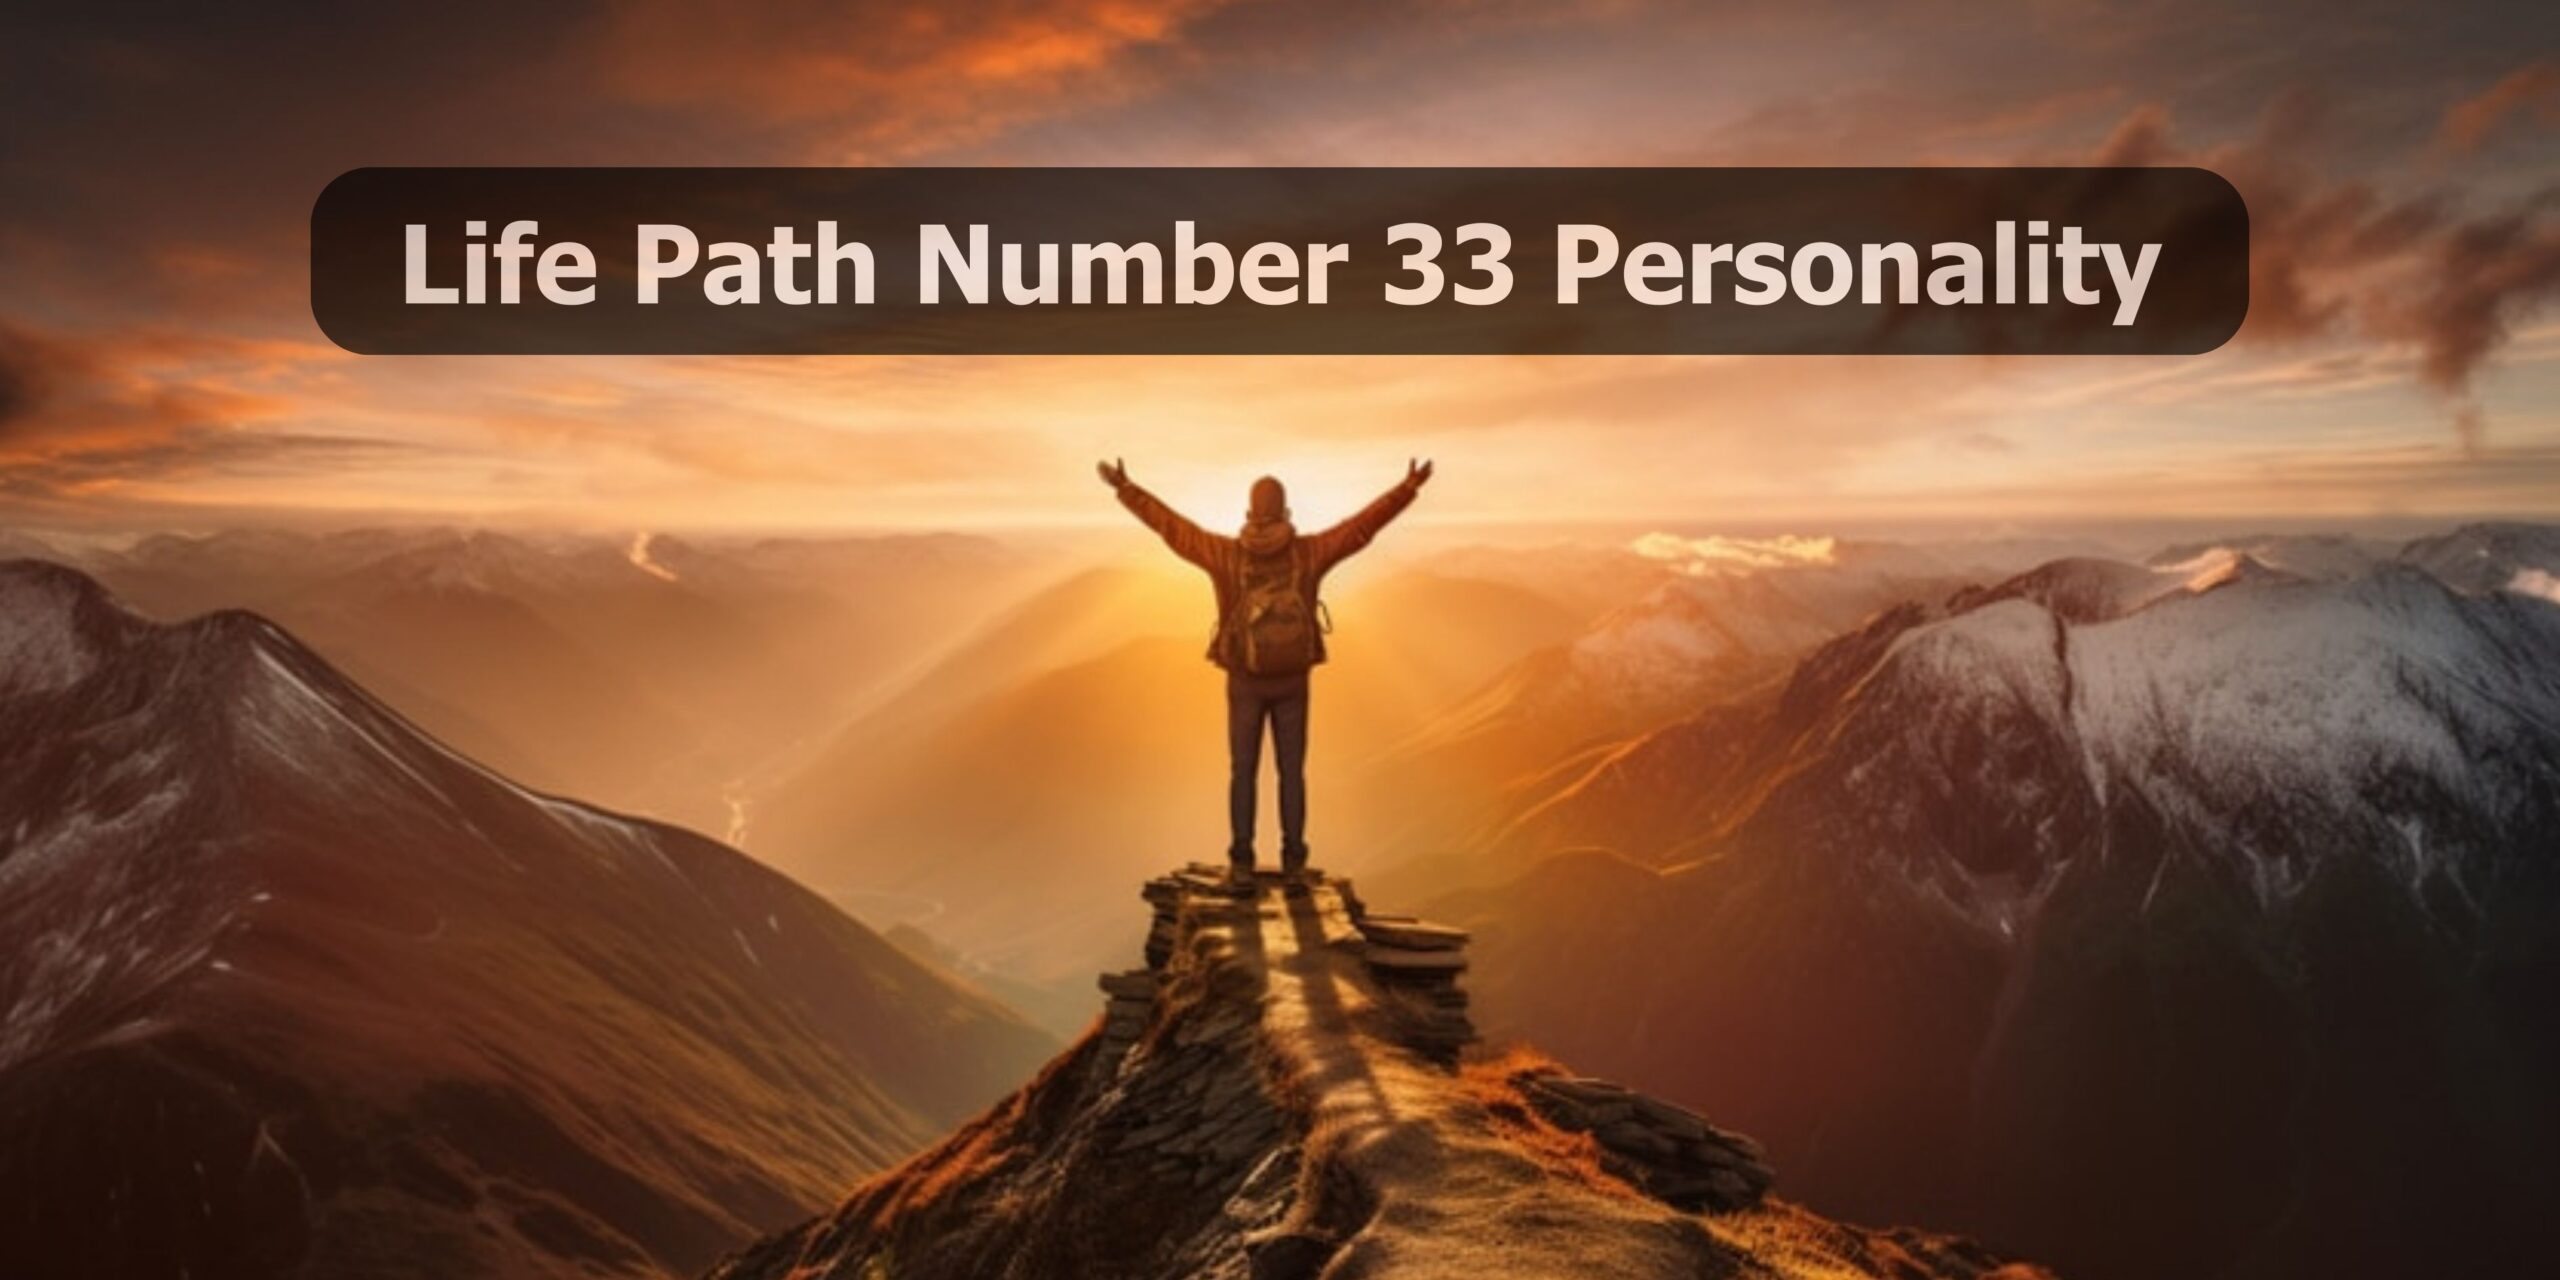 Life Path Number 33 Personality